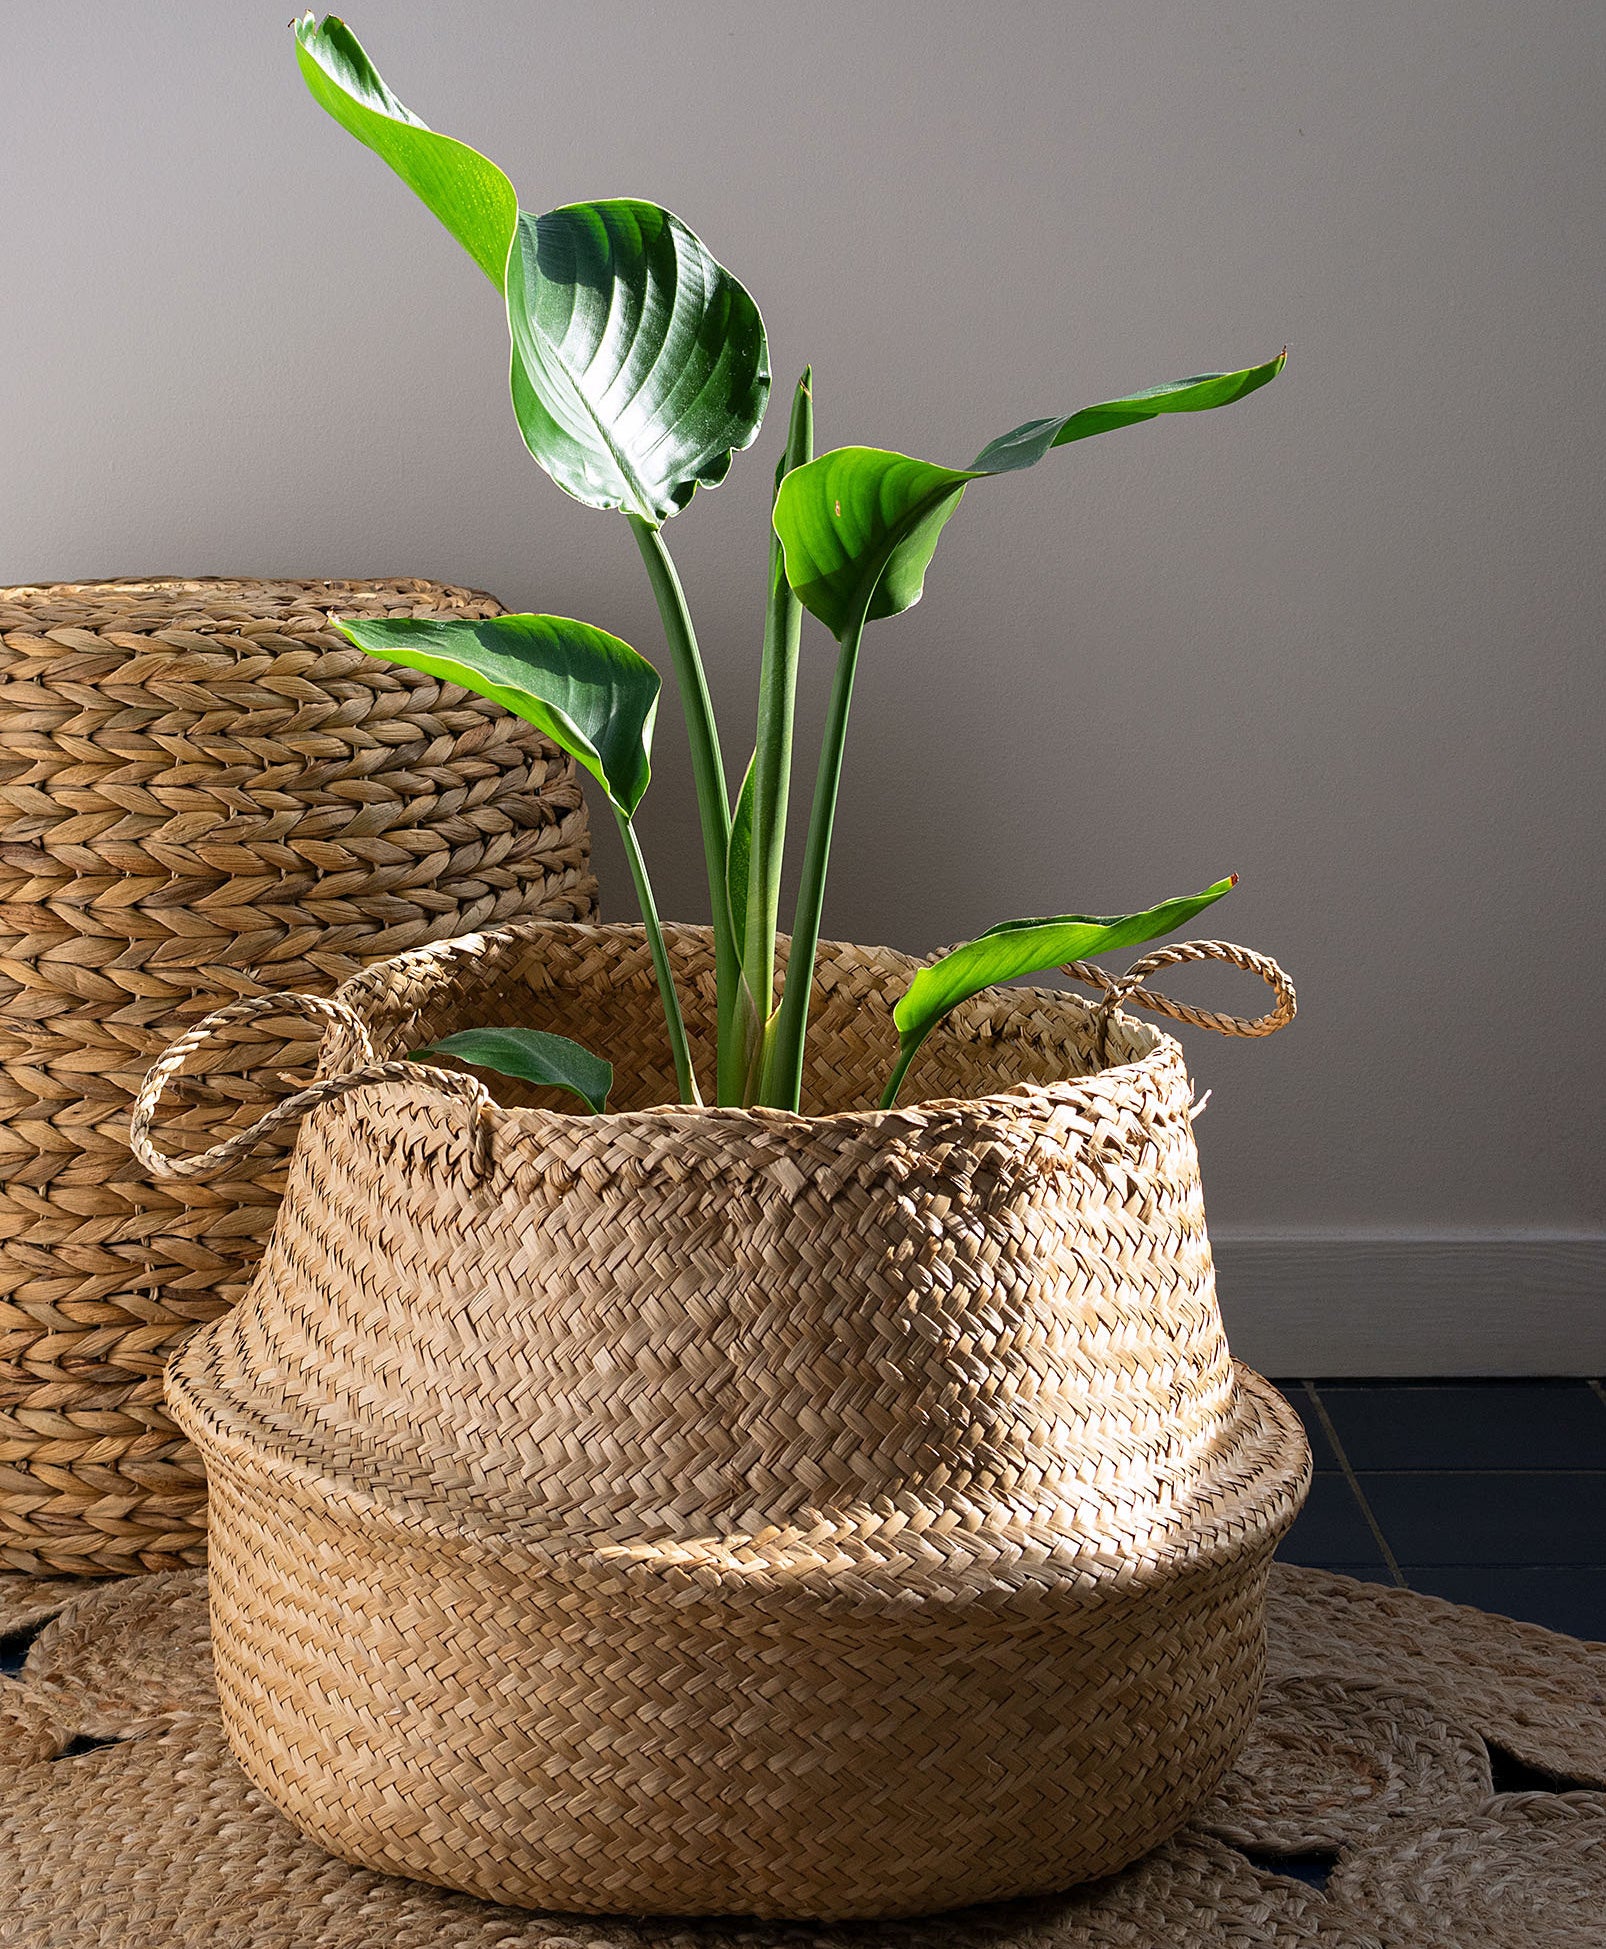 A plant in the basket